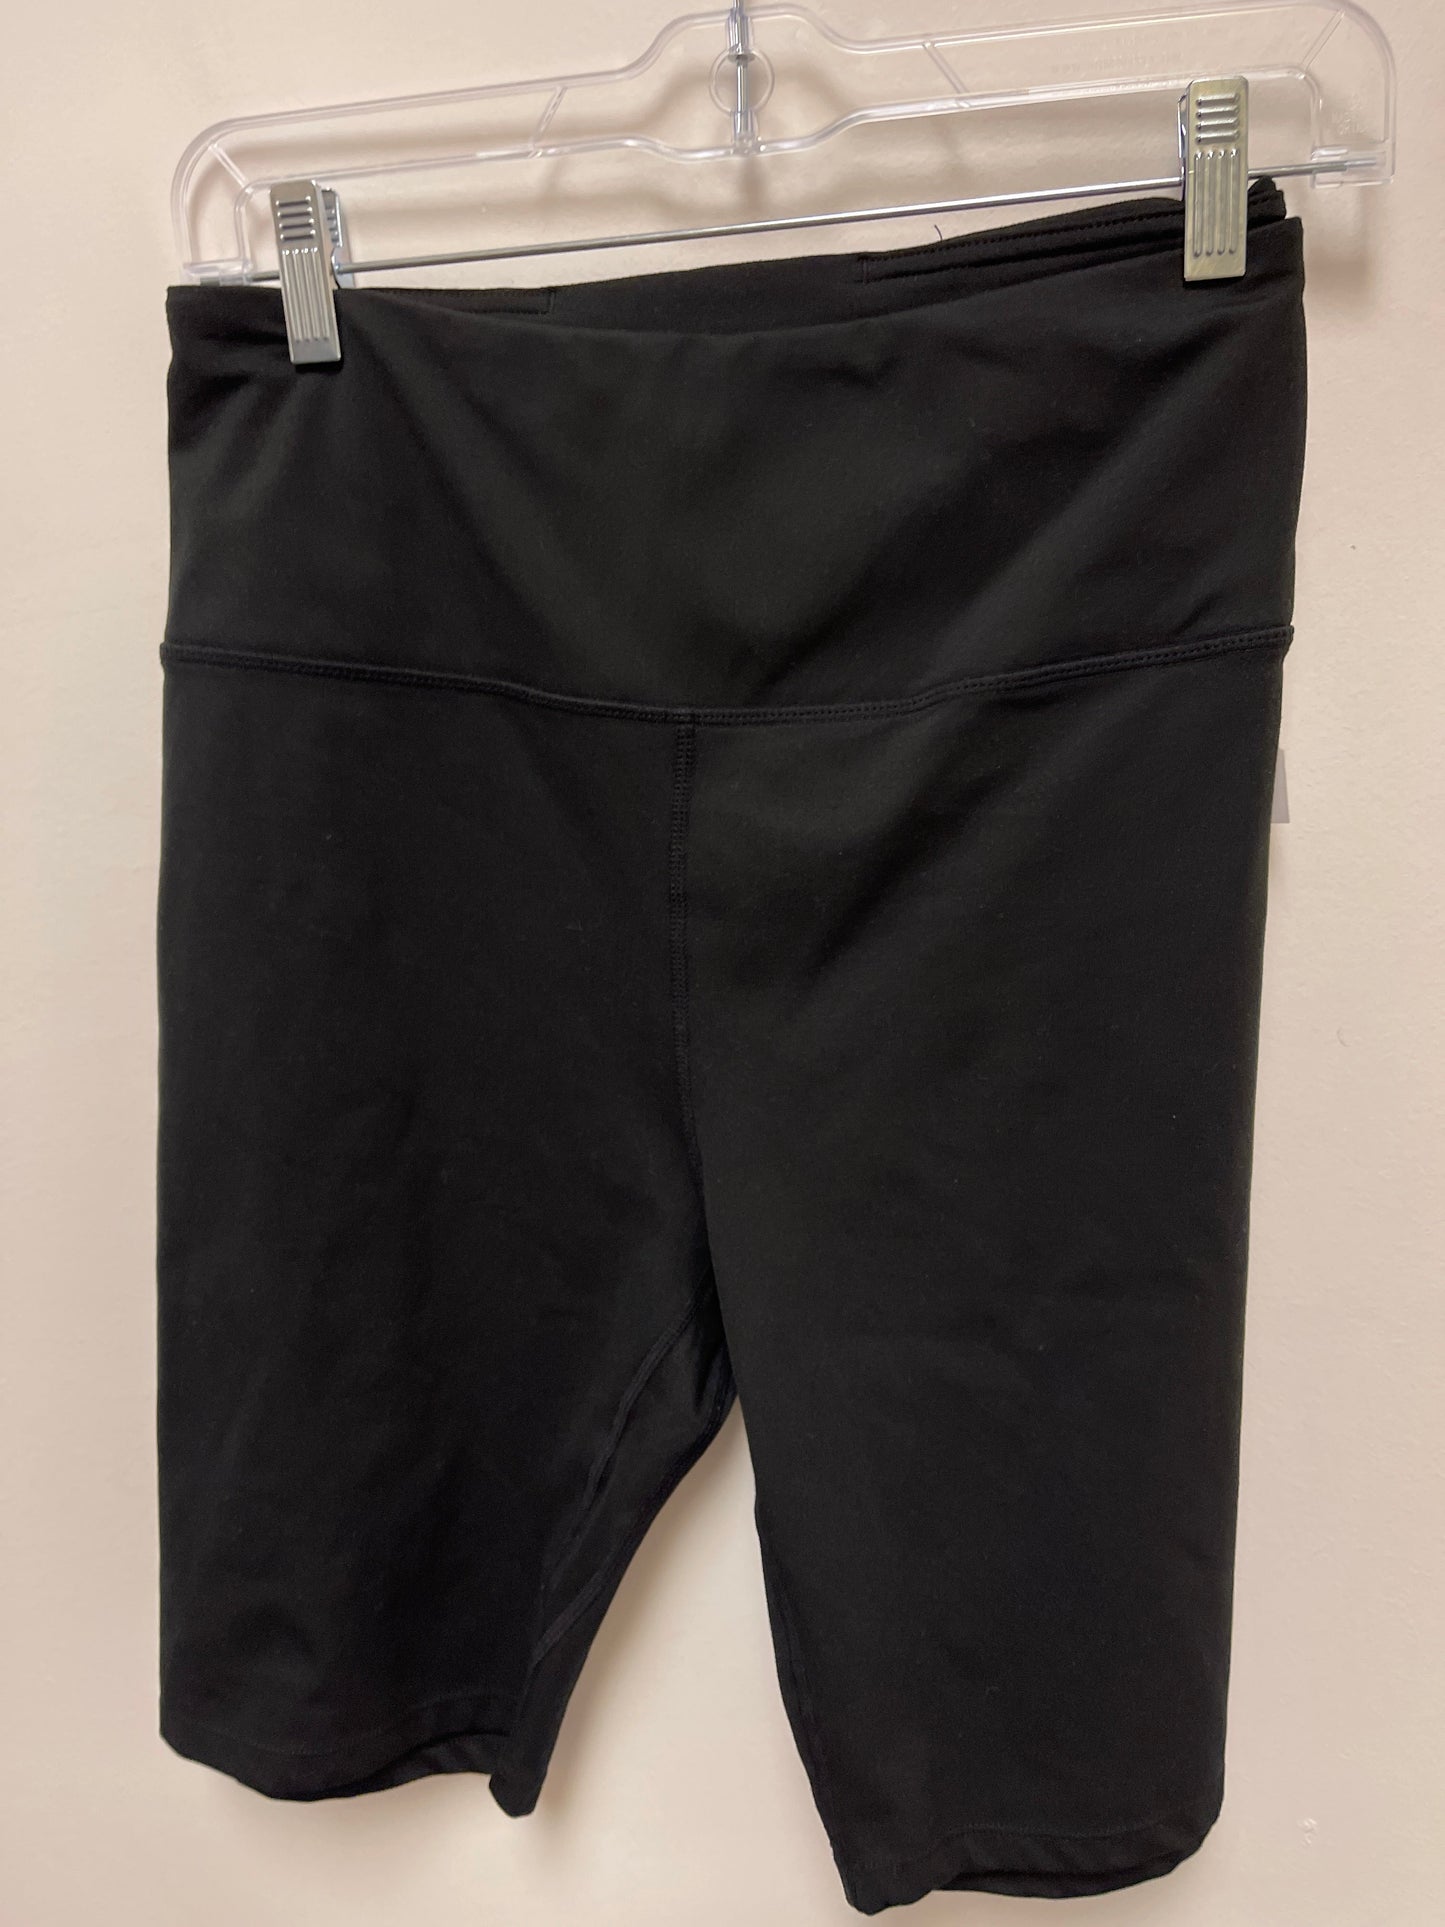 Black Athletic Shorts Clothes Mentor, Size 3x